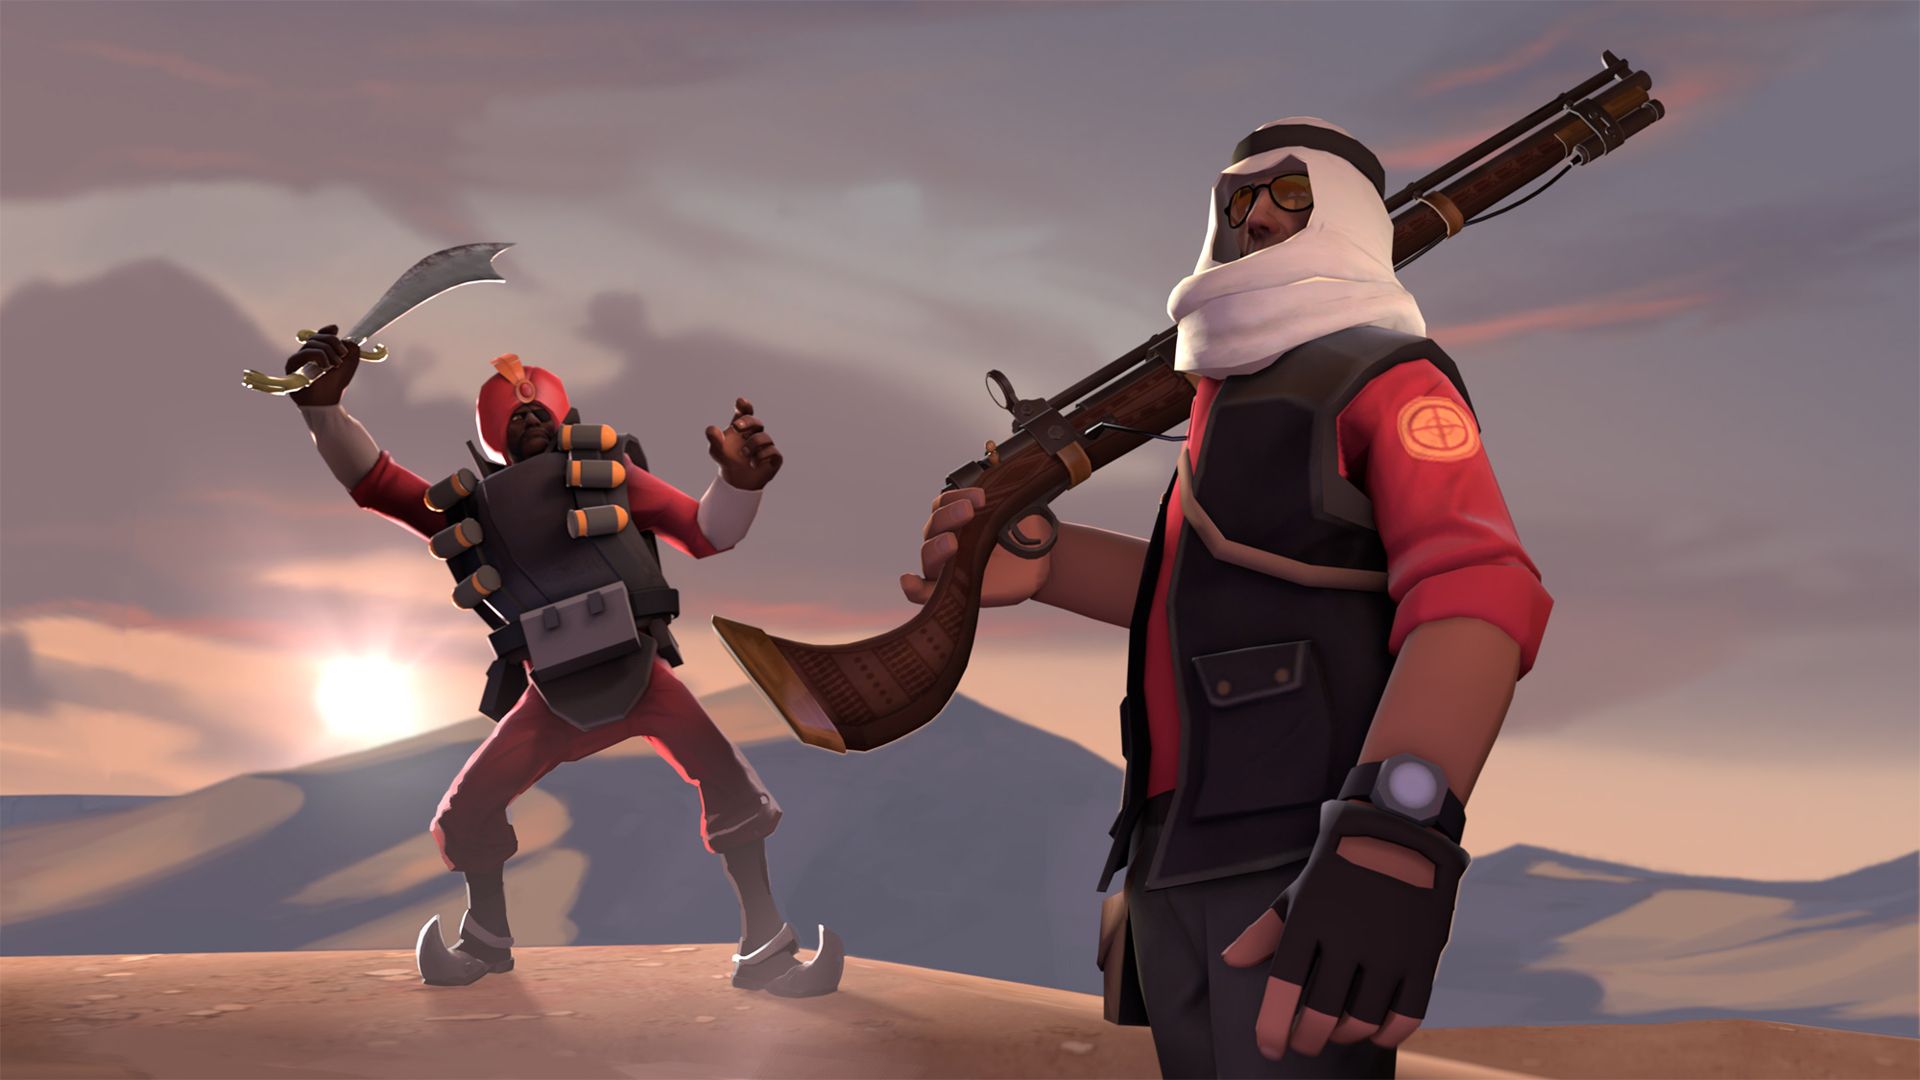 Team Fortress 2 Wallpapers Best Backgrounds